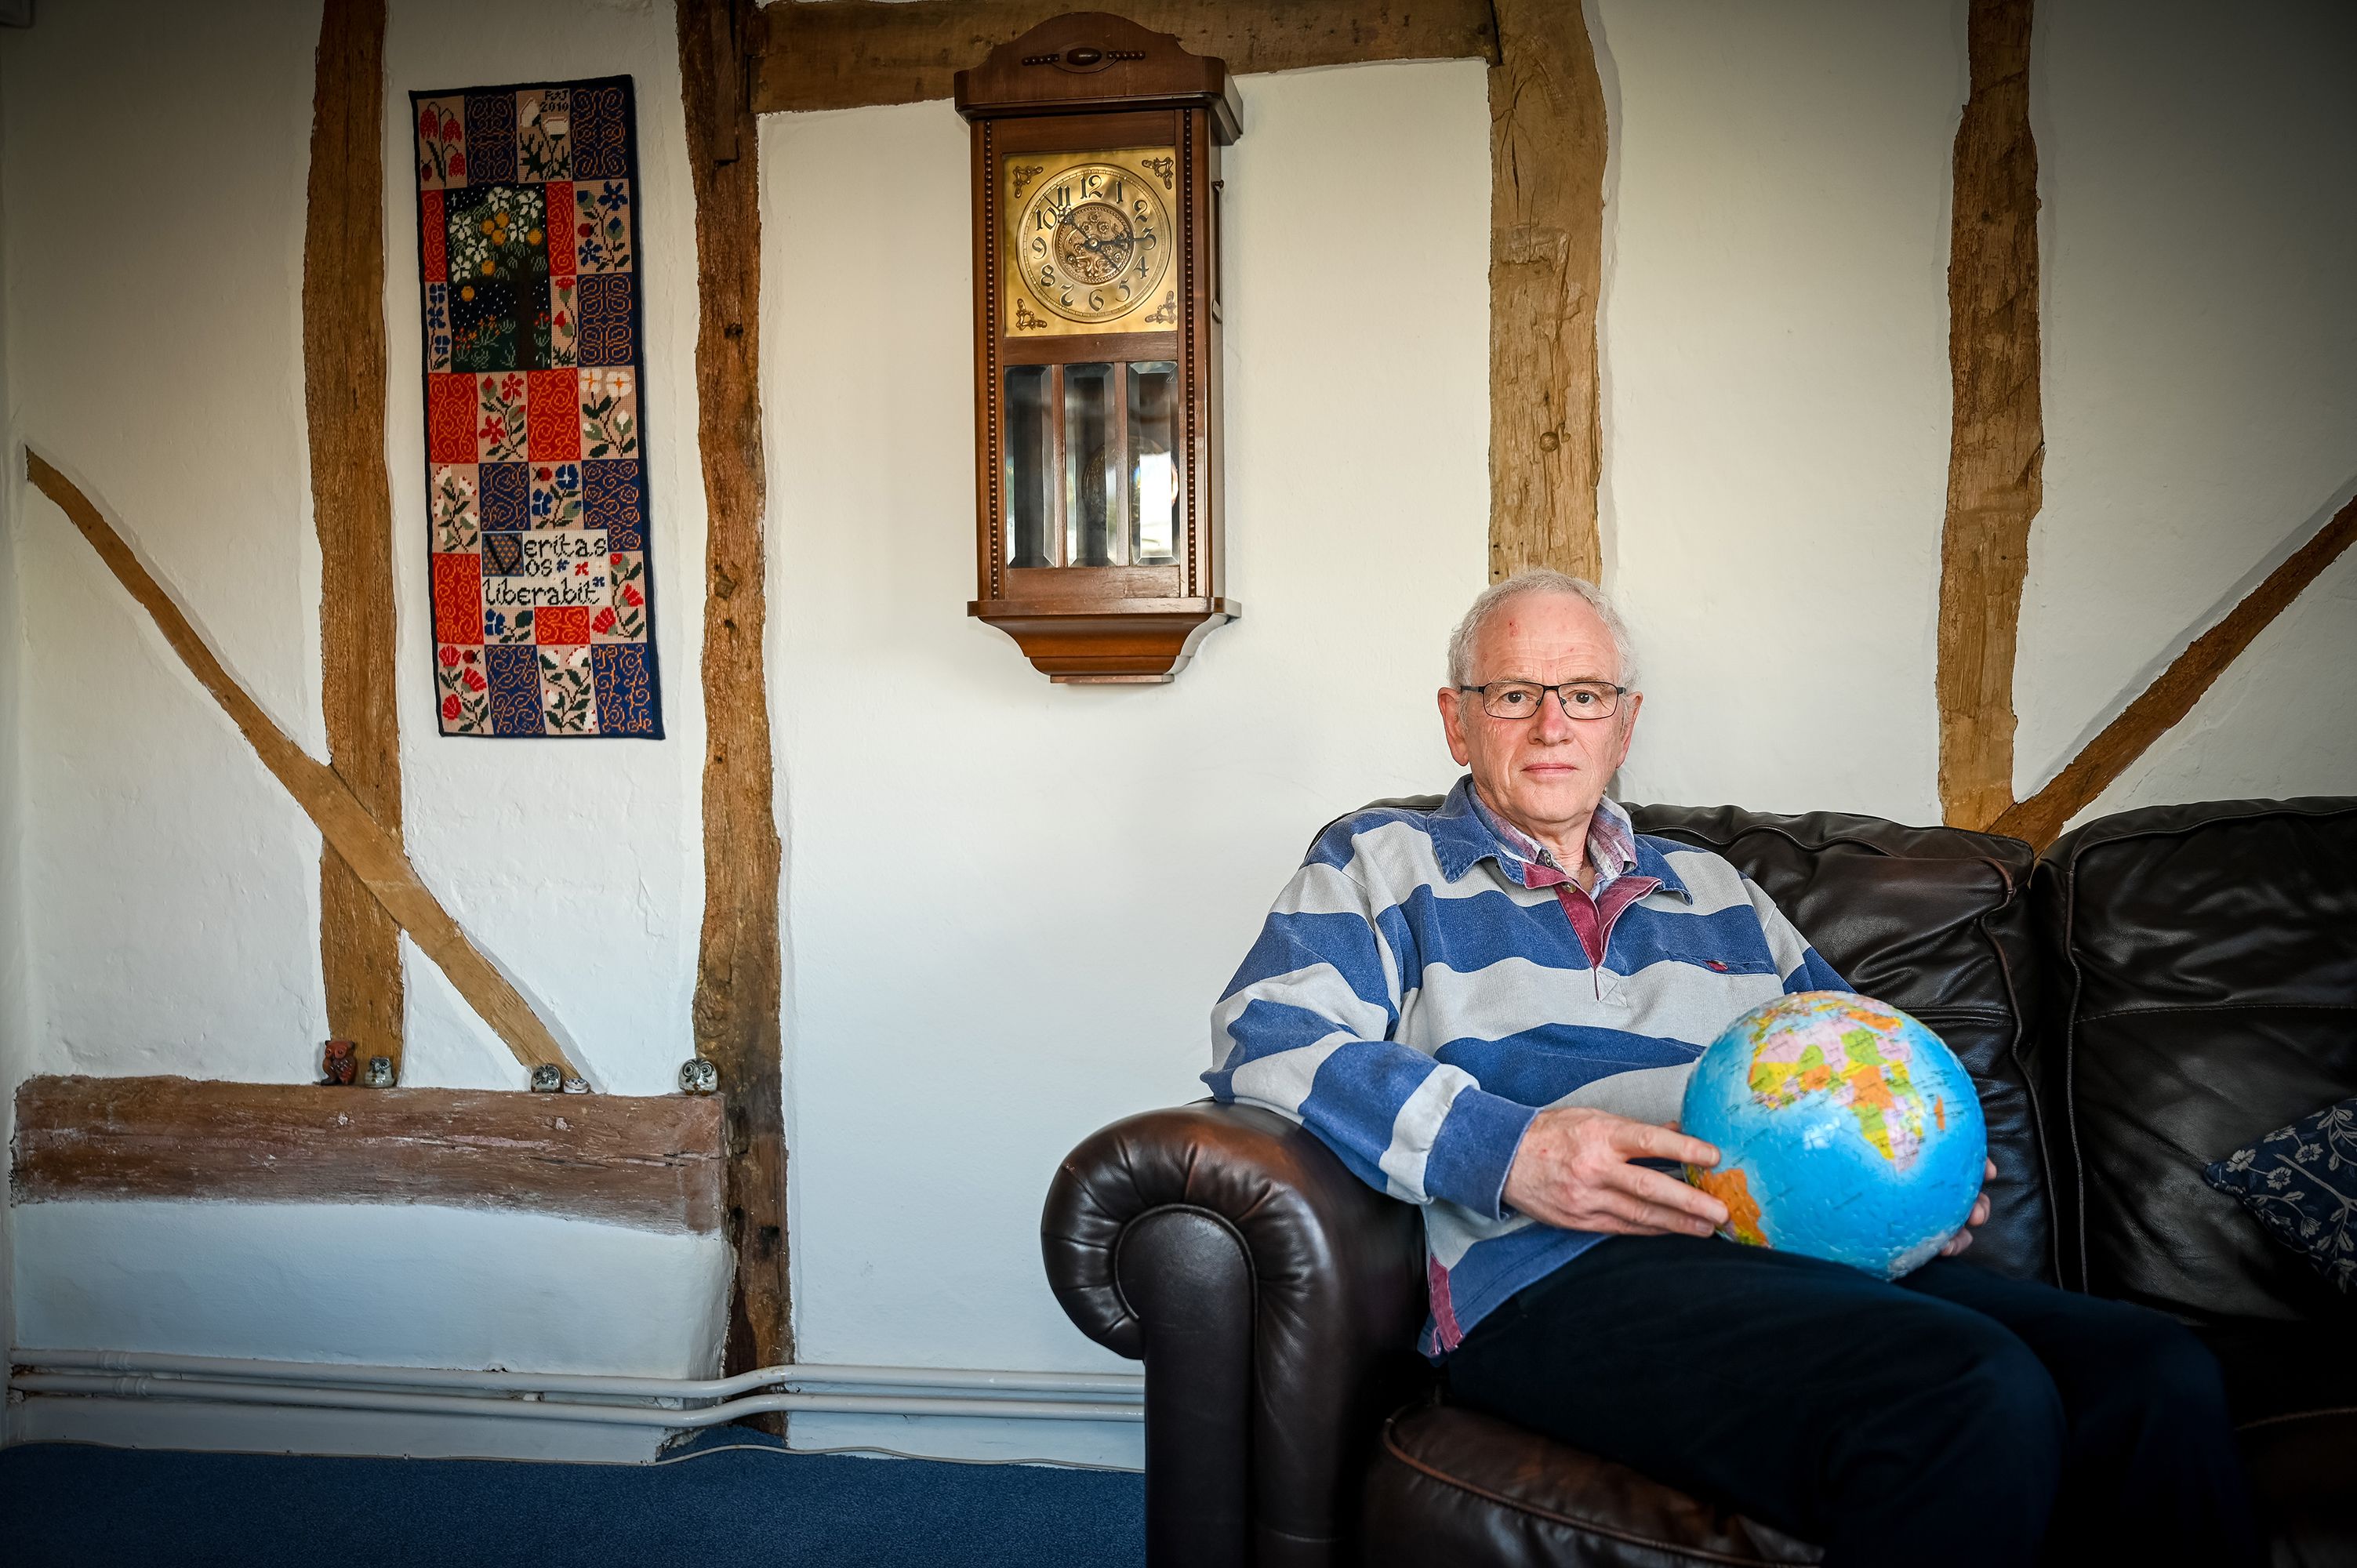 man holding a globe sat on a leather sofa in a timber framed house